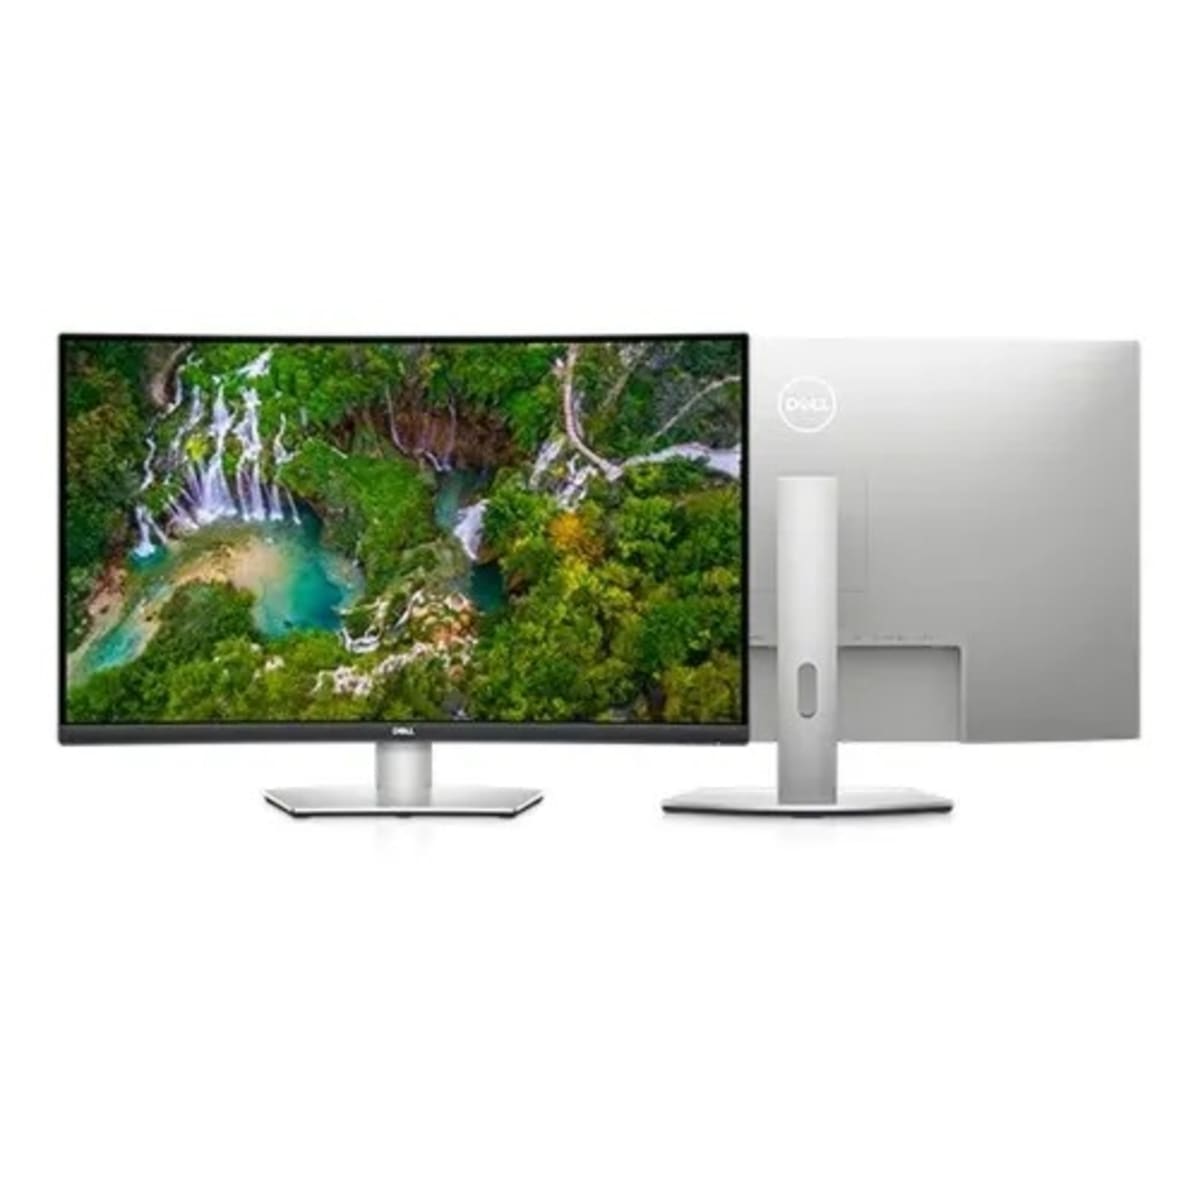 Dell 32 Curved 4K UHD Monitor - S3221QS